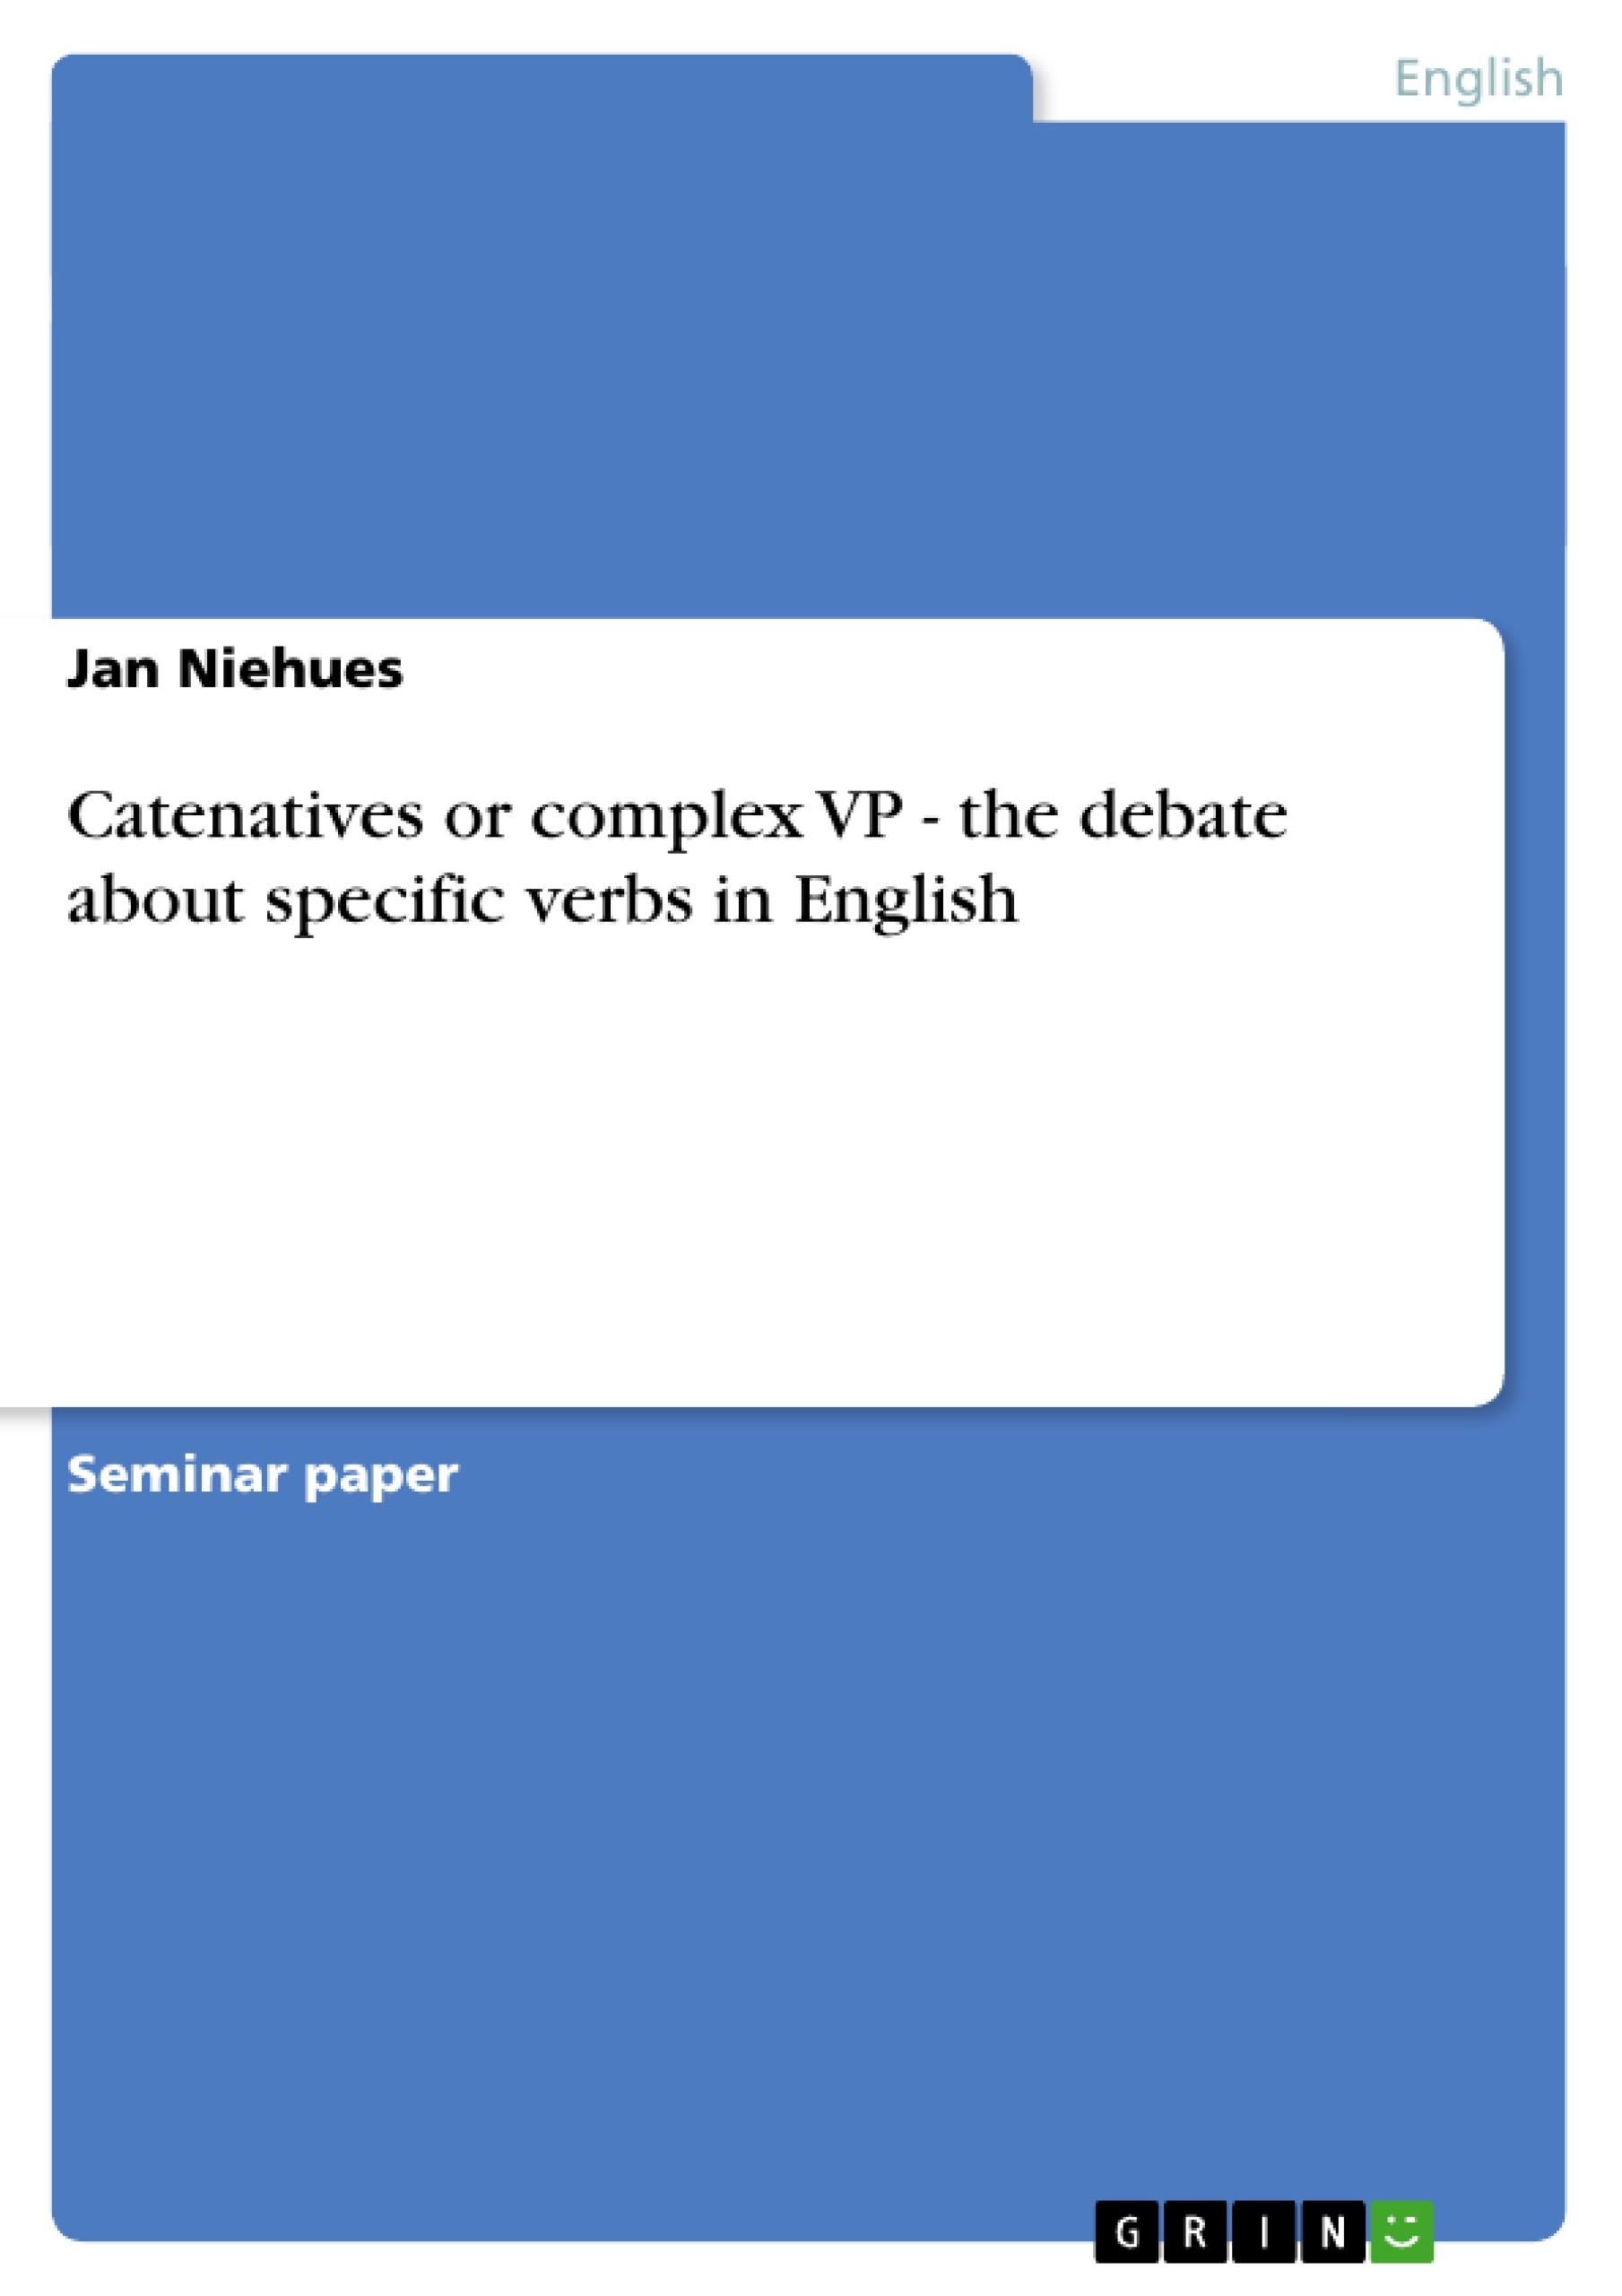 Título: Catenatives or complex VP - the debate about specific verbs in English